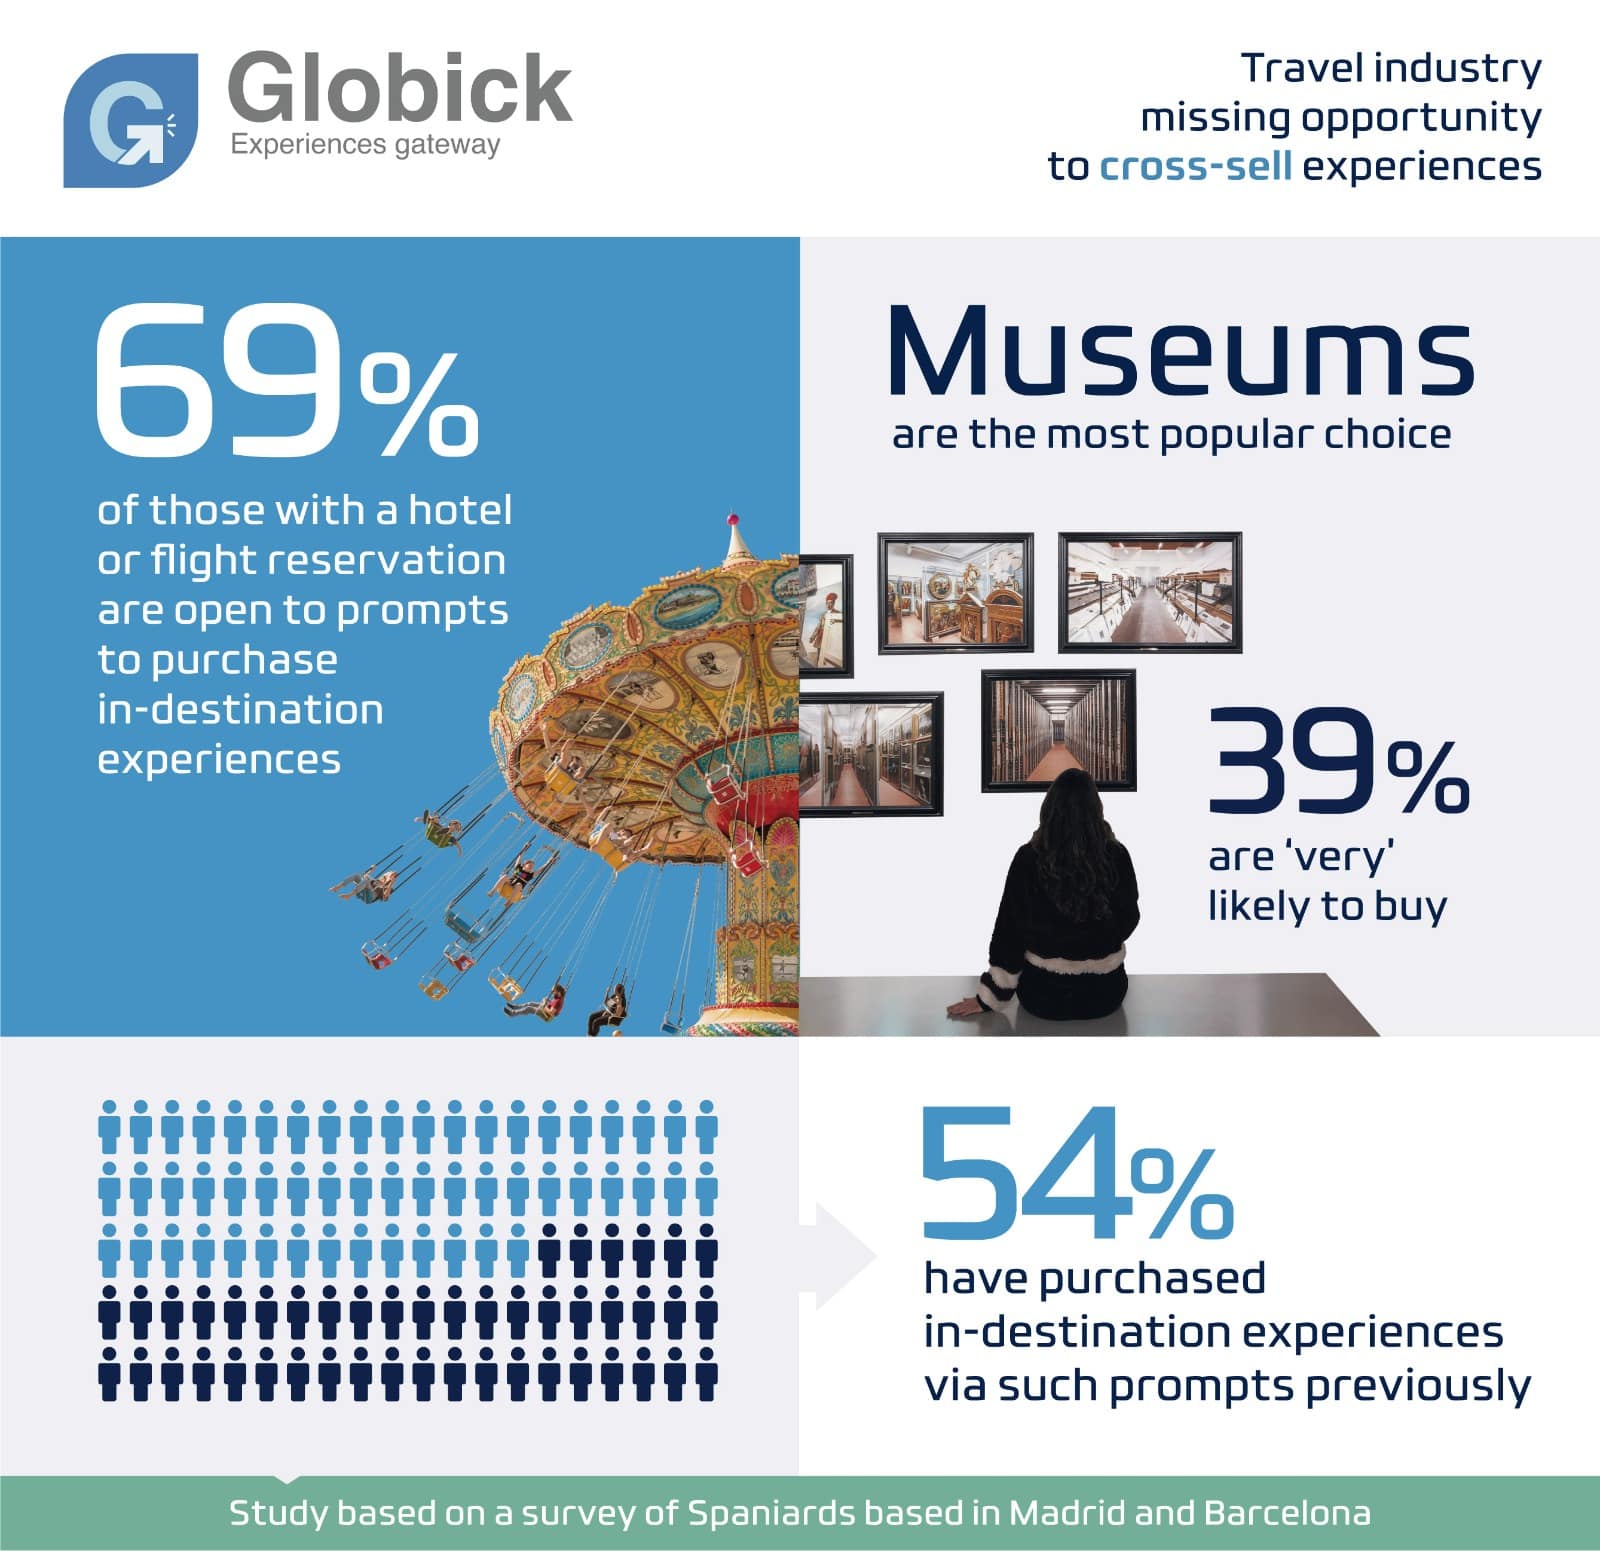 Travel industry missing opportunity to cross-sell experiences – Globick